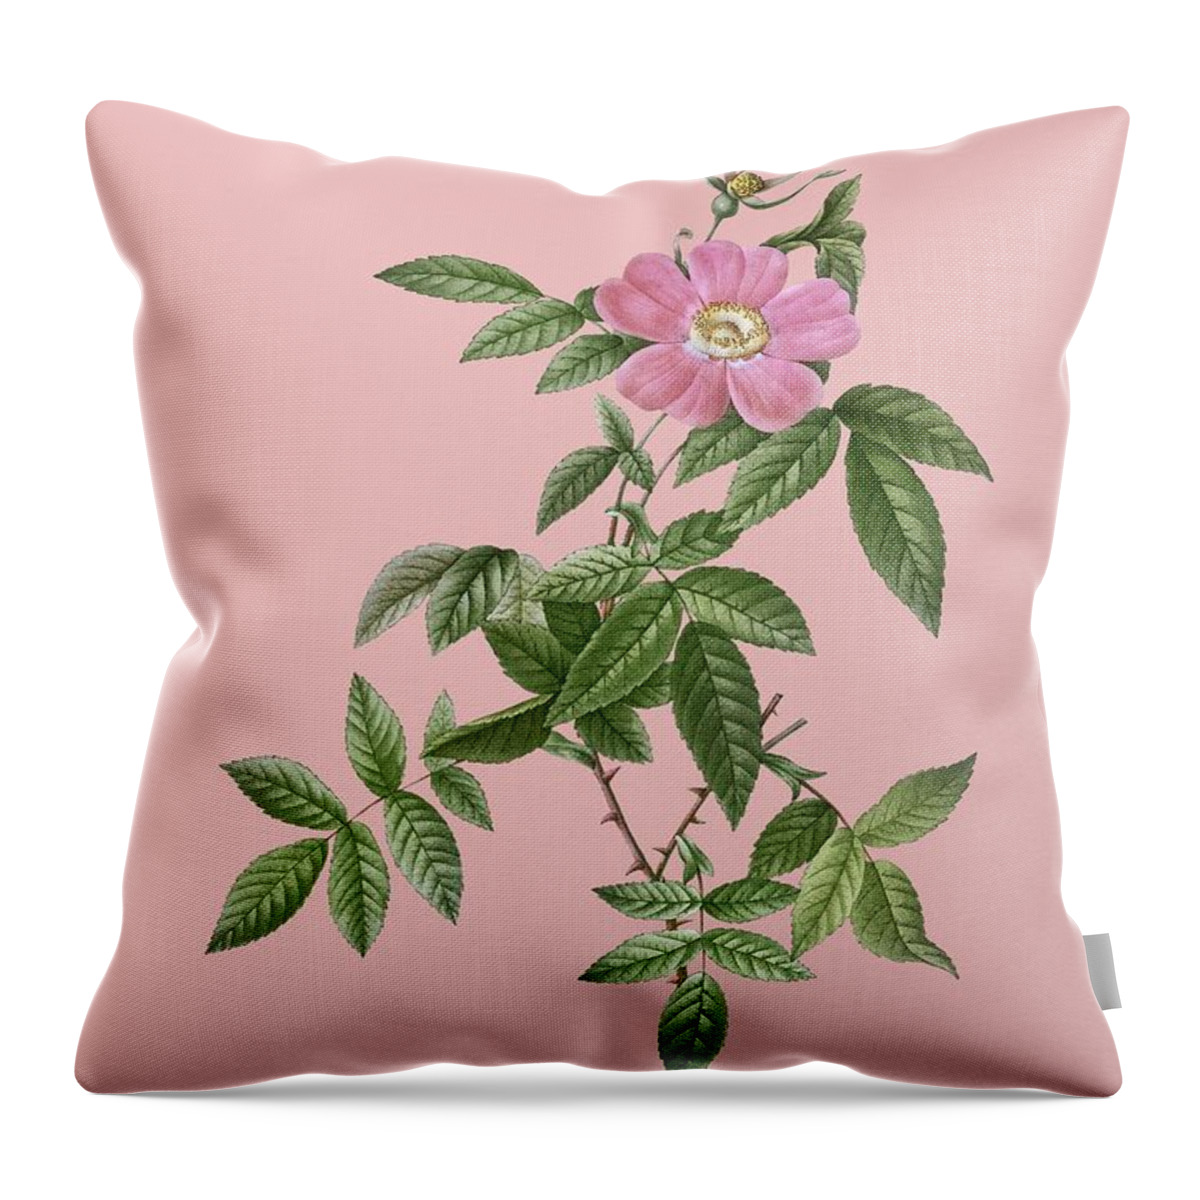 Holyrockarts Throw Pillow featuring the mixed media Vintage Pink Boursault Rose Botanical Illustration on Pink by Holy Rock Design